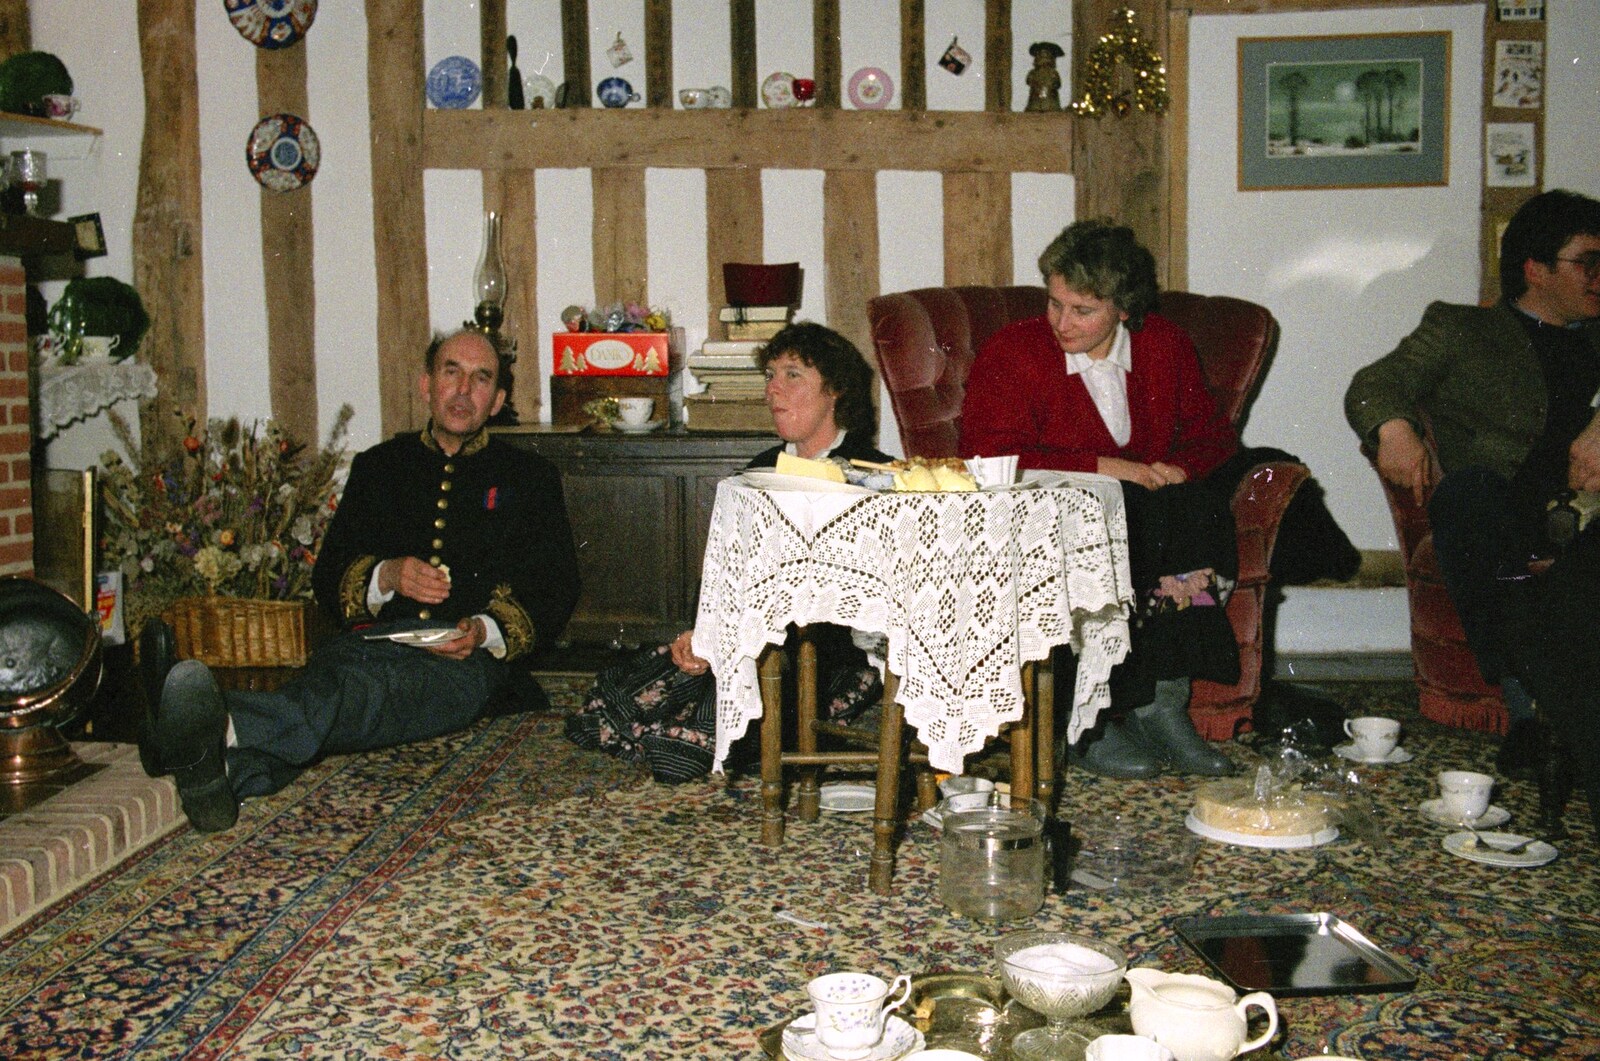 Hanging out in Elteb and Derek's lounge from Late Night, and Christmas with the Coxes, Needham, Norfolk - 25th December 1989